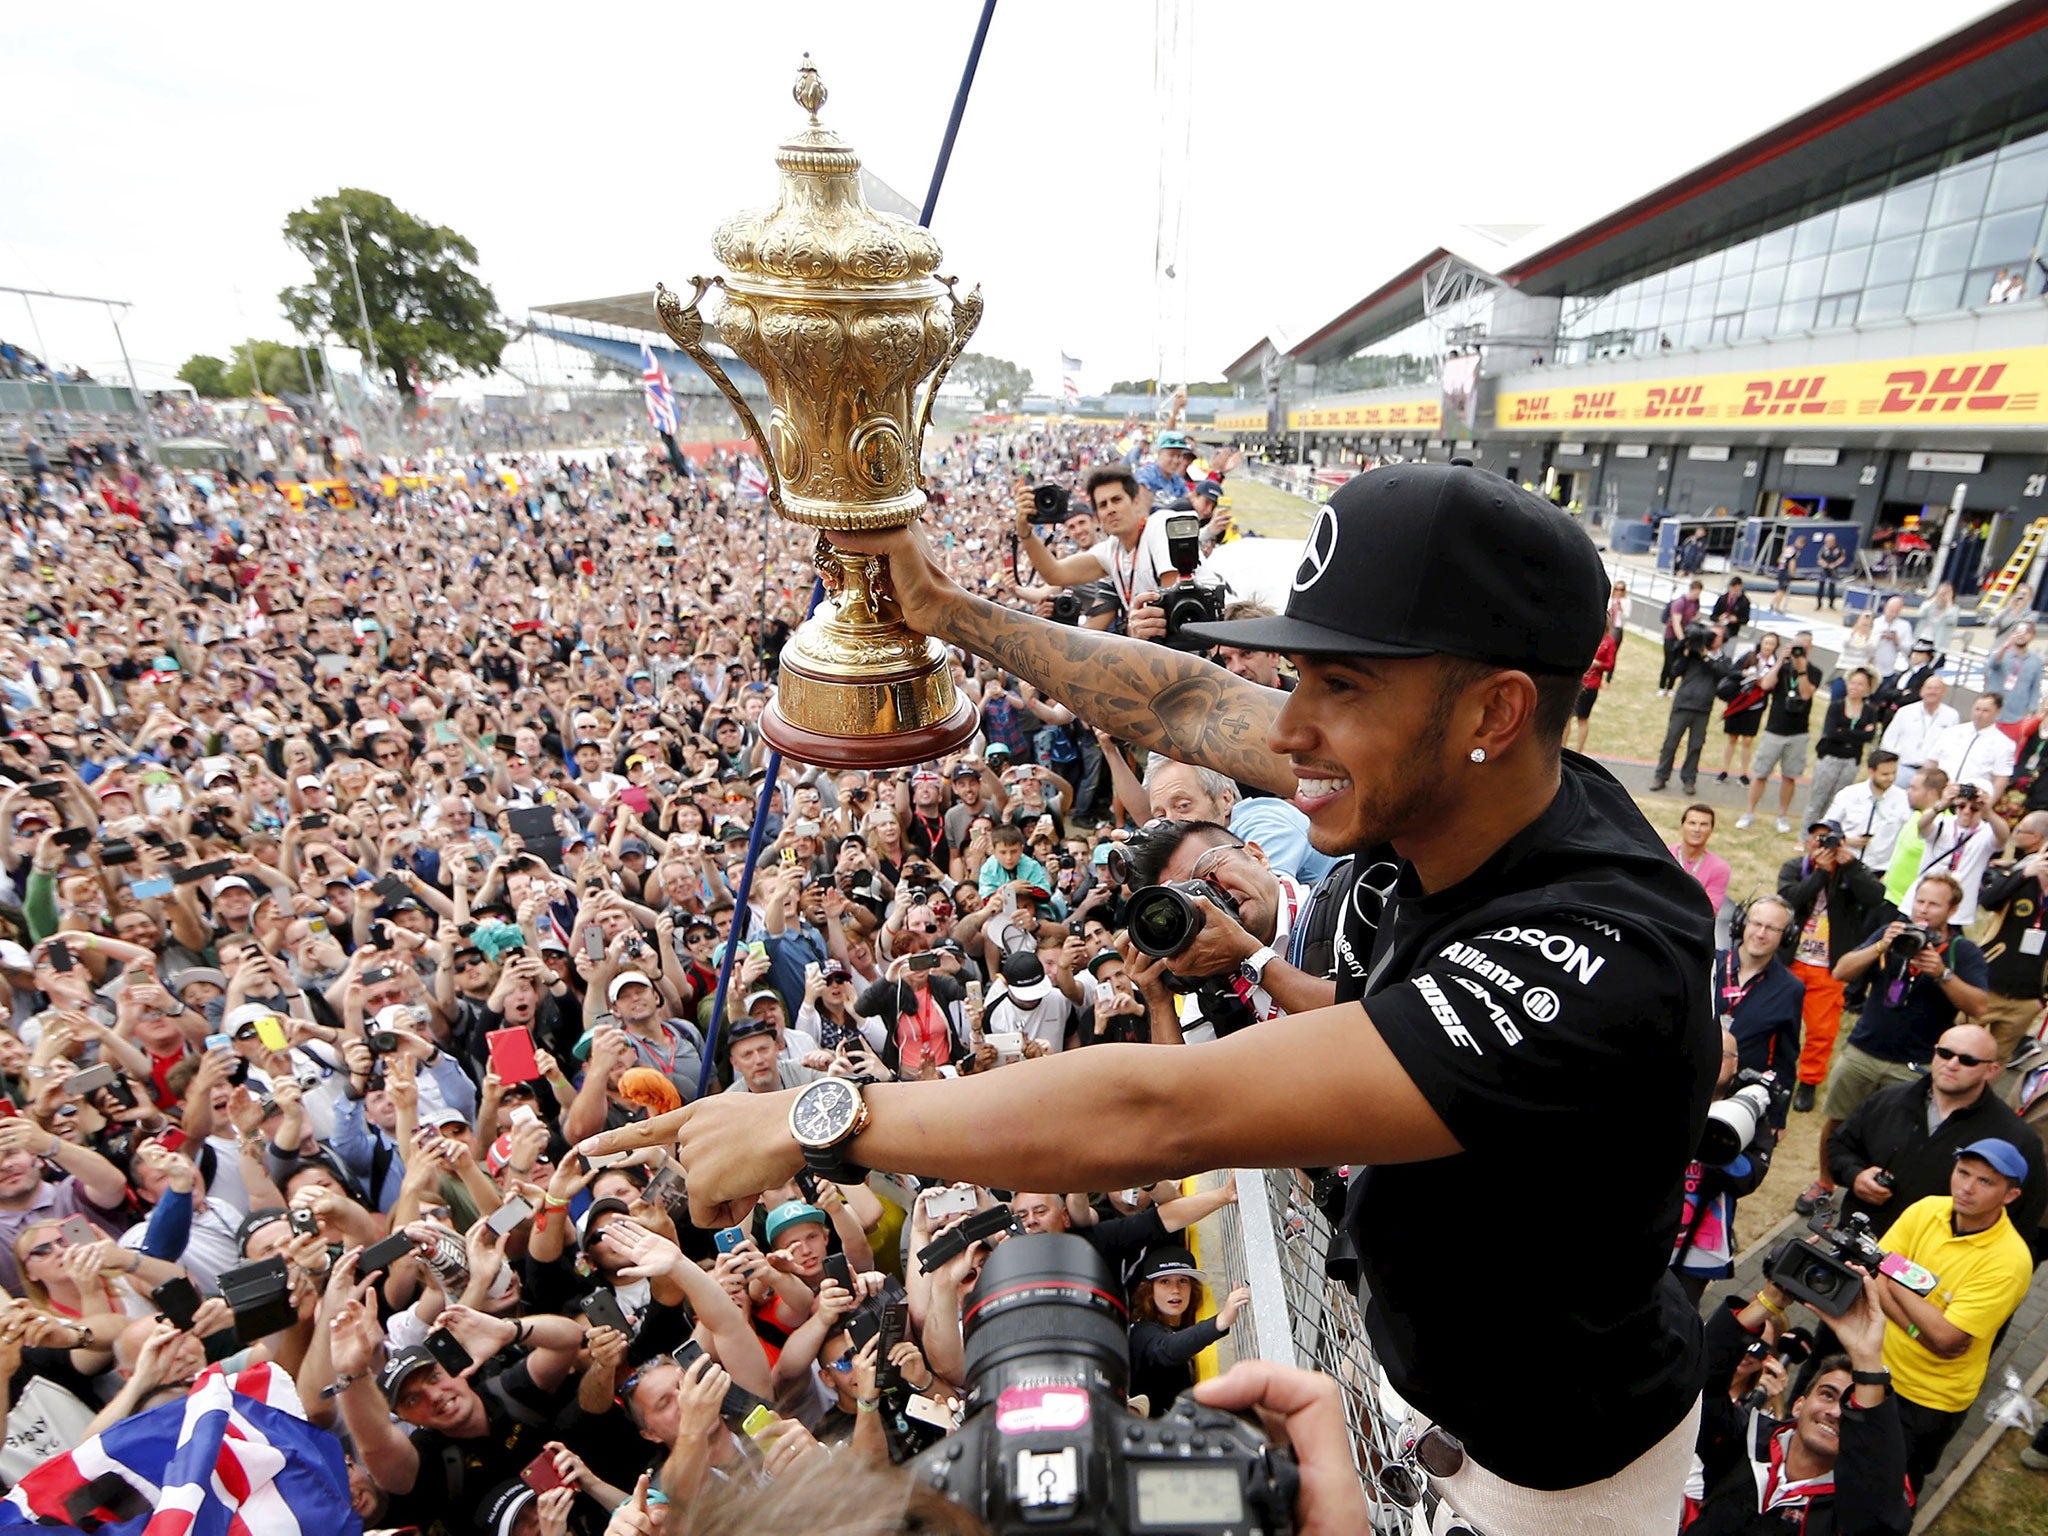 Lewis Hamilton shows his delighted fans the British Grand Prix trophy after his victory at Silverstone